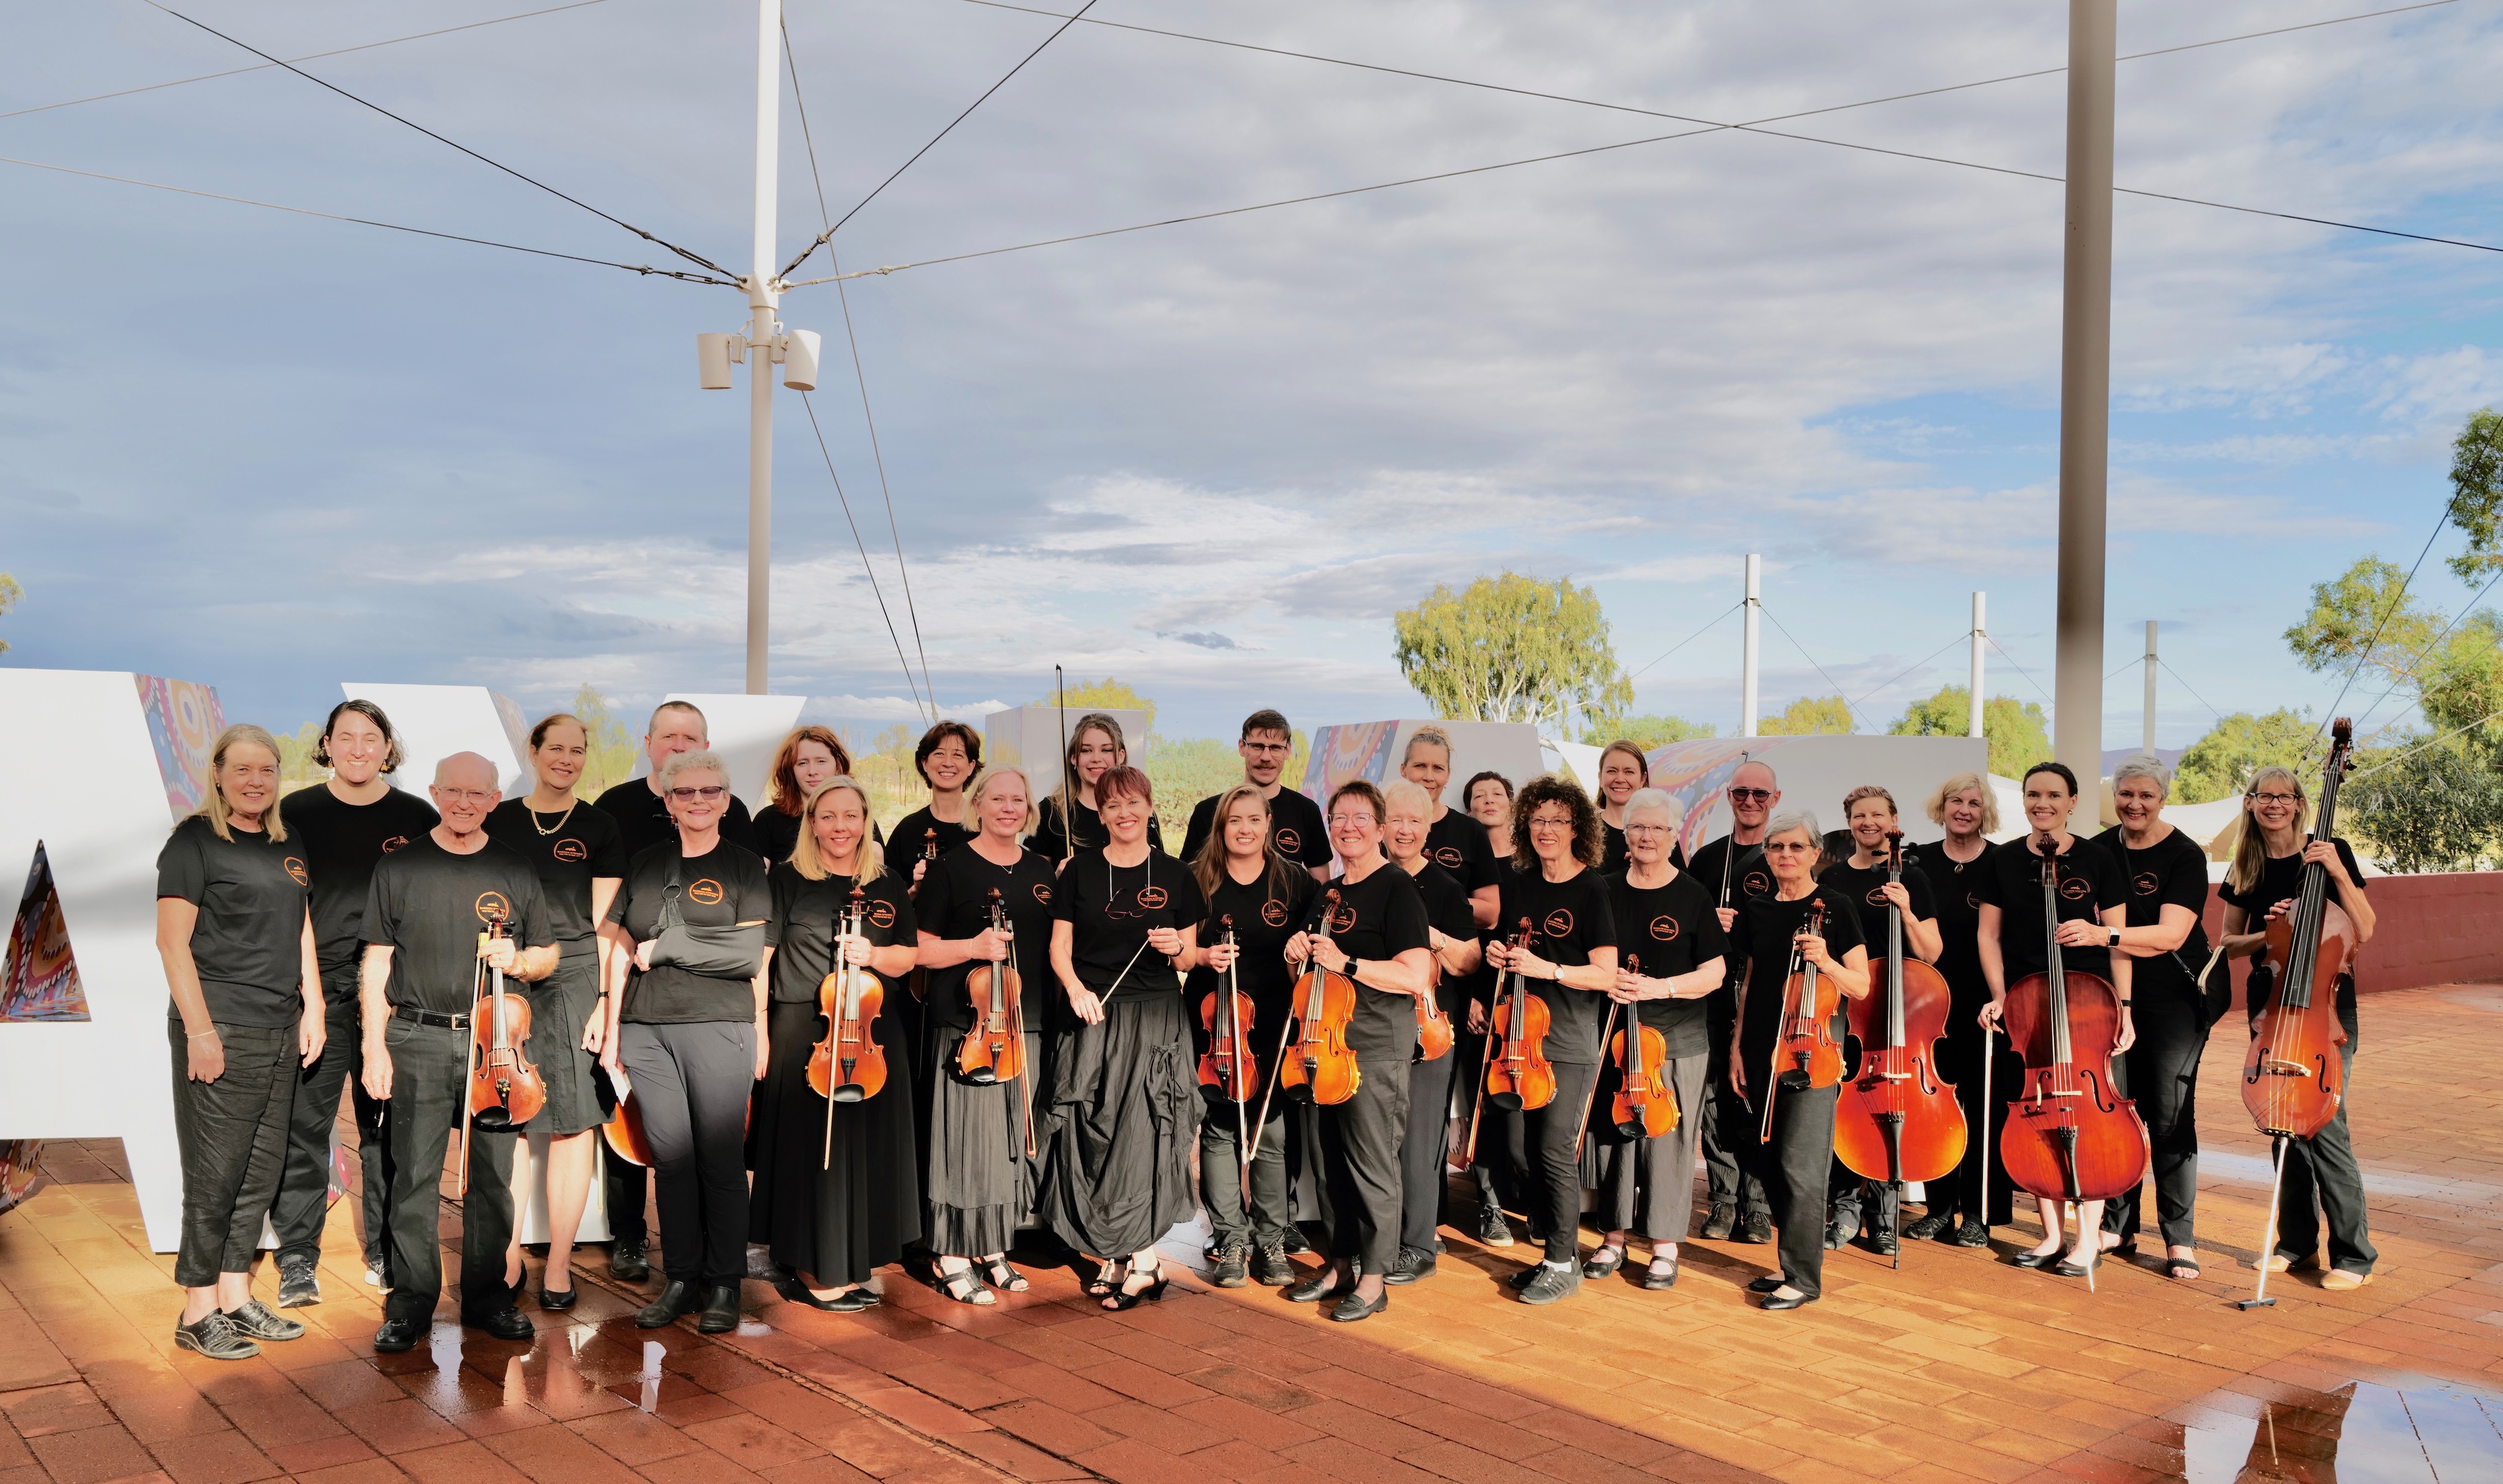 Photograph of 28 people dressed in black, holding string instruments.